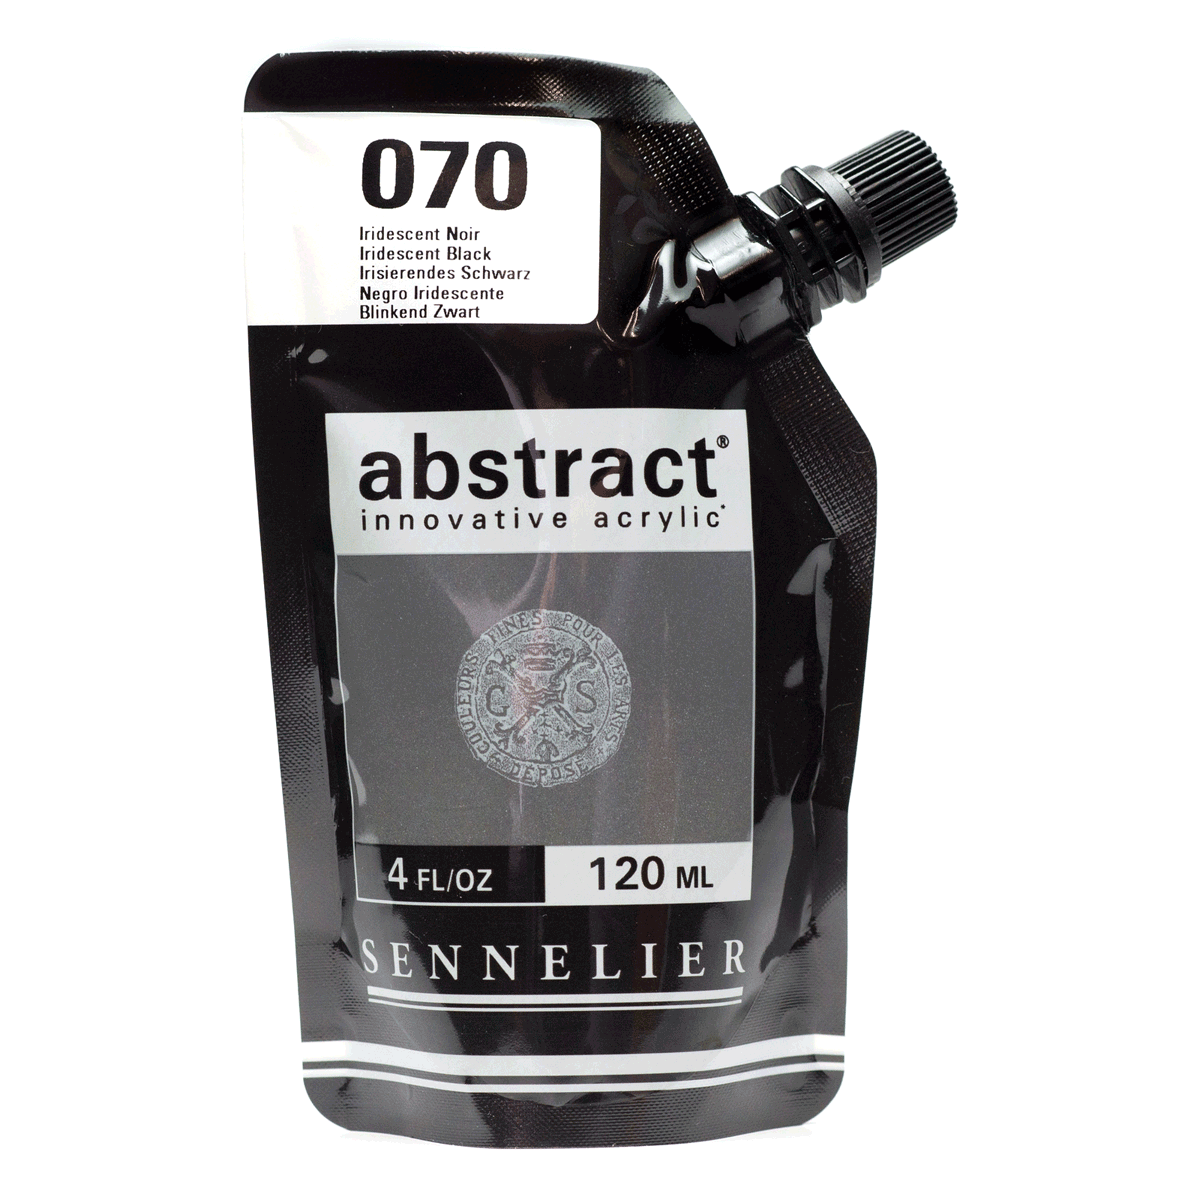 Abstract Acrylic Pouch - 070 Iridescent Black 120ml